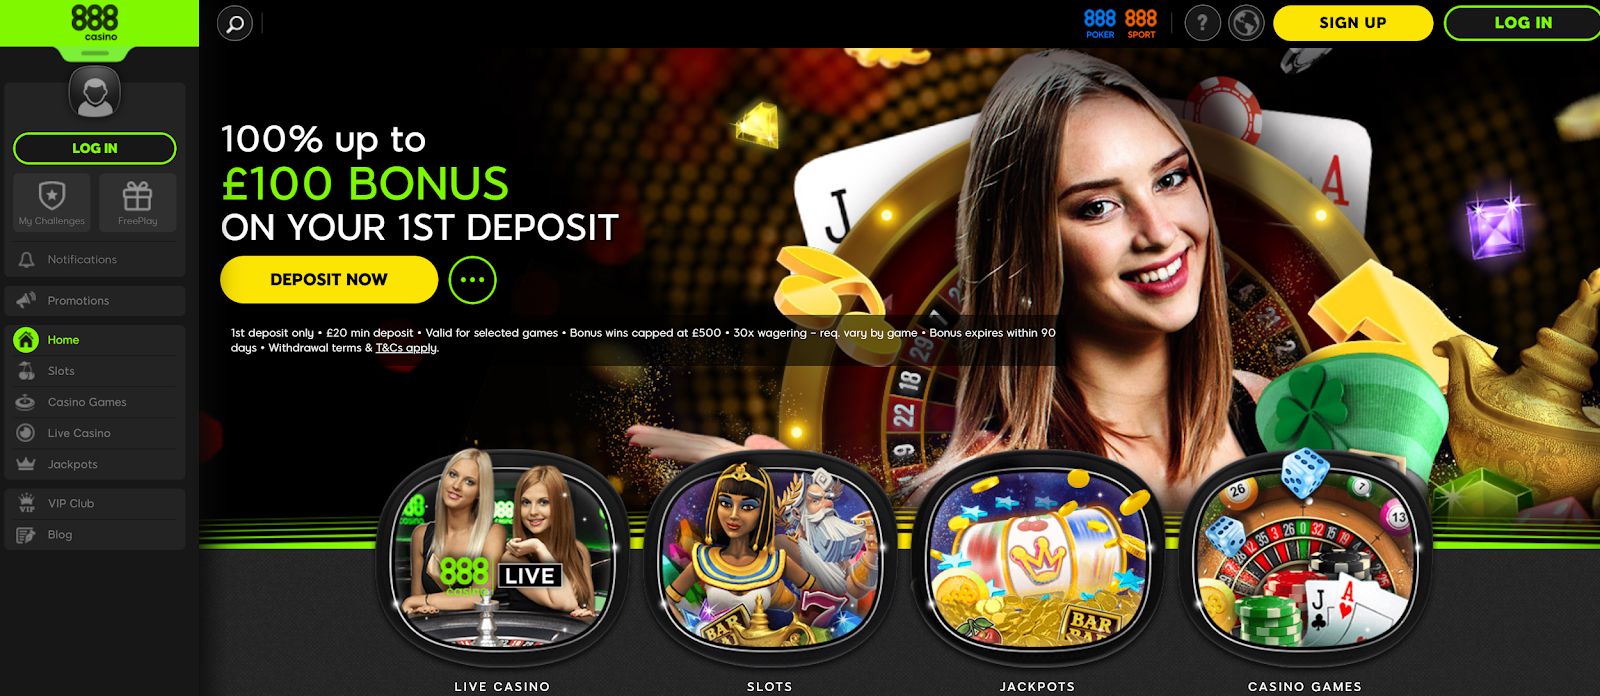 5 Features Of The Best Slot Sites